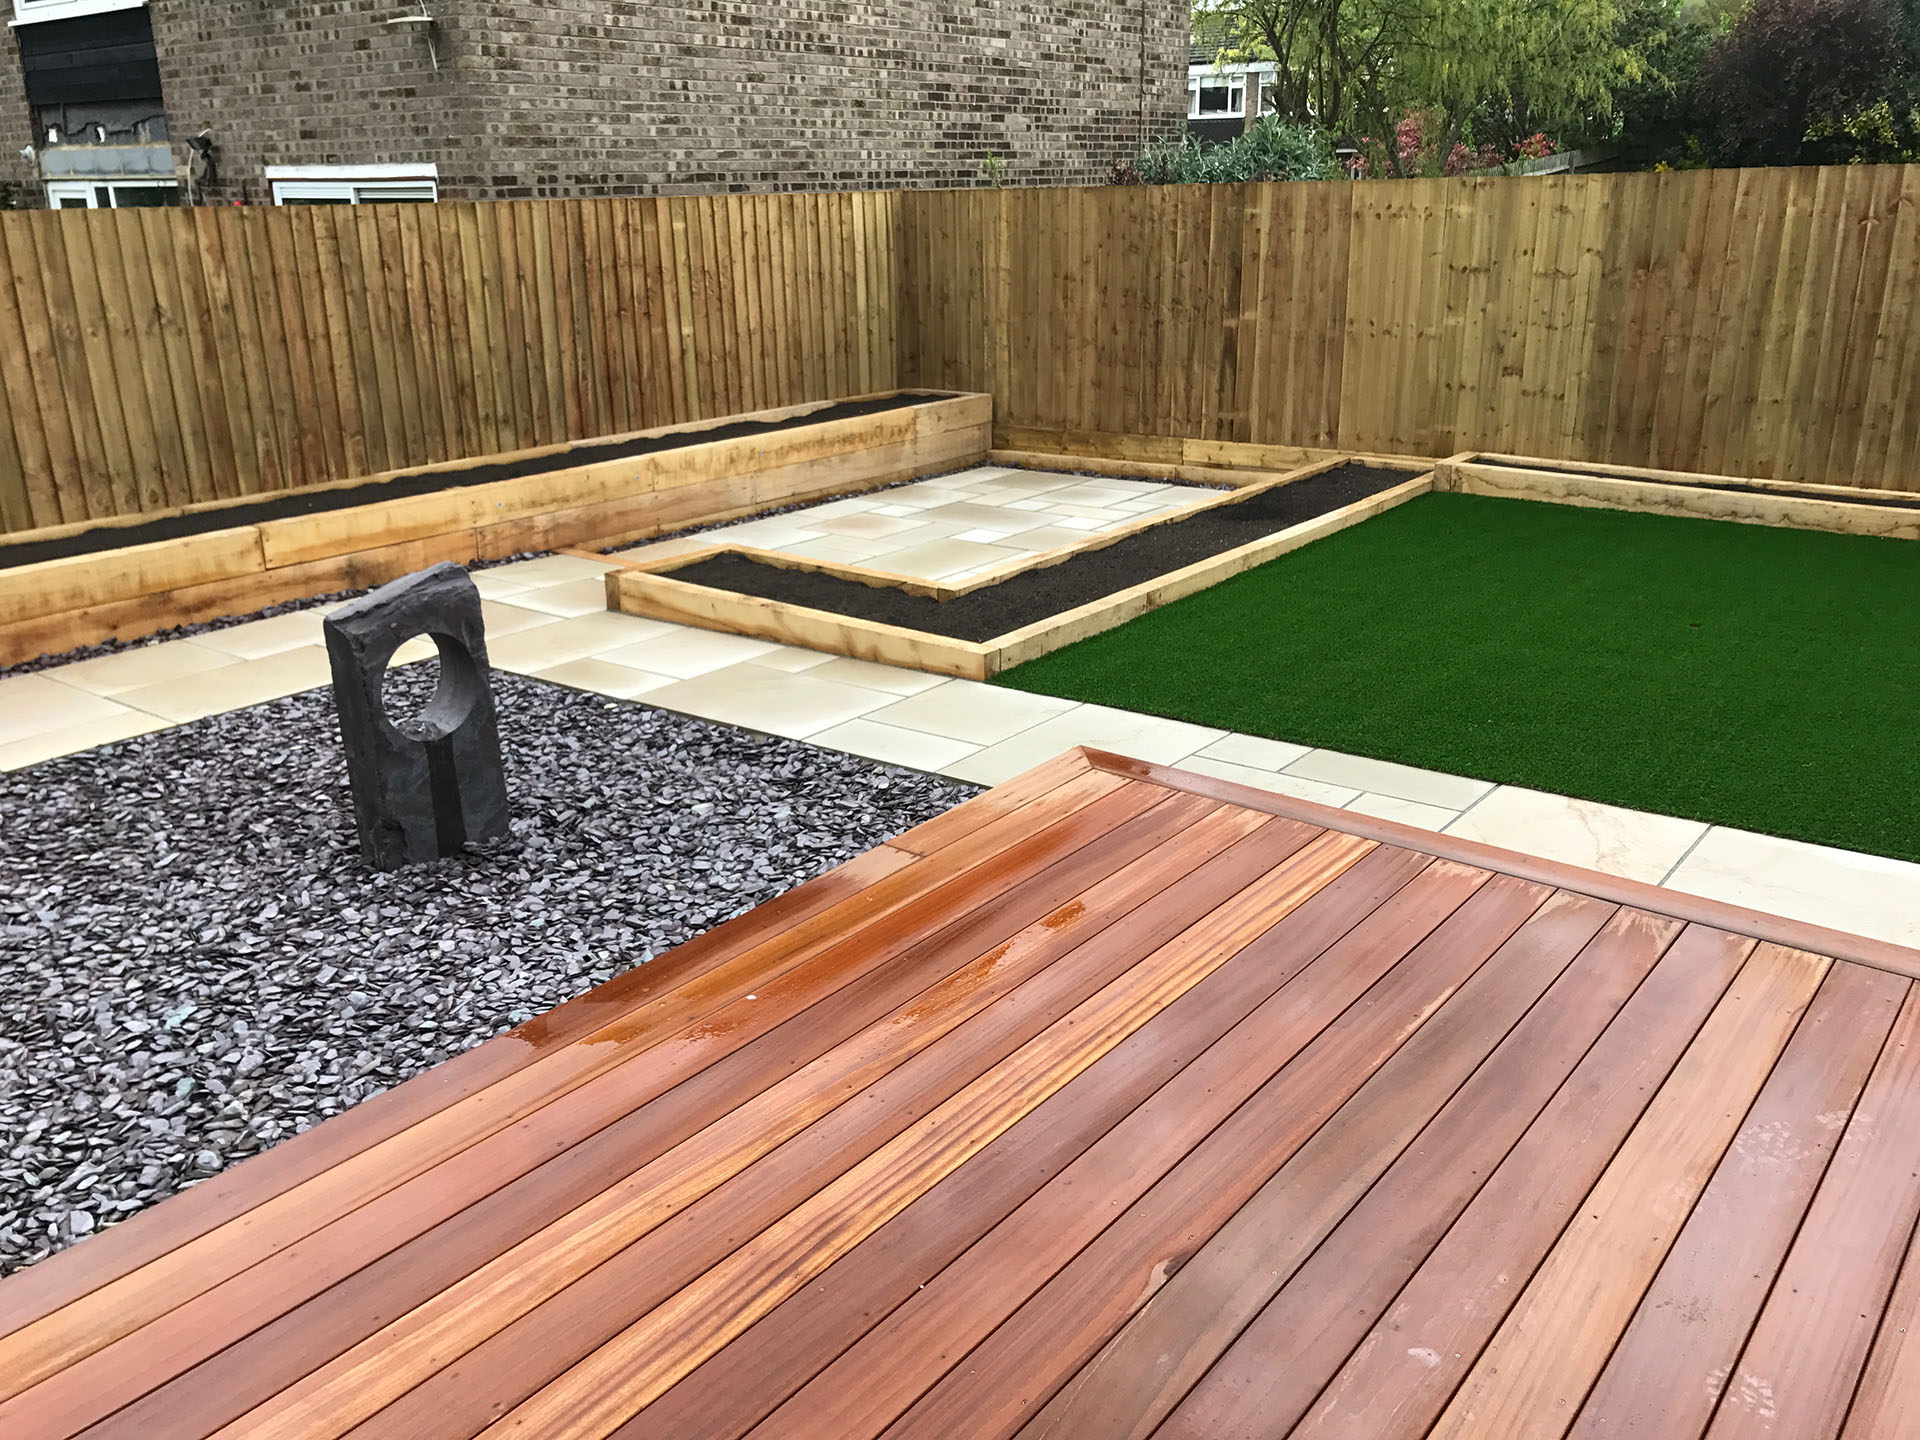 Hardwood-decking-water-feature-raised-beds-and-paving